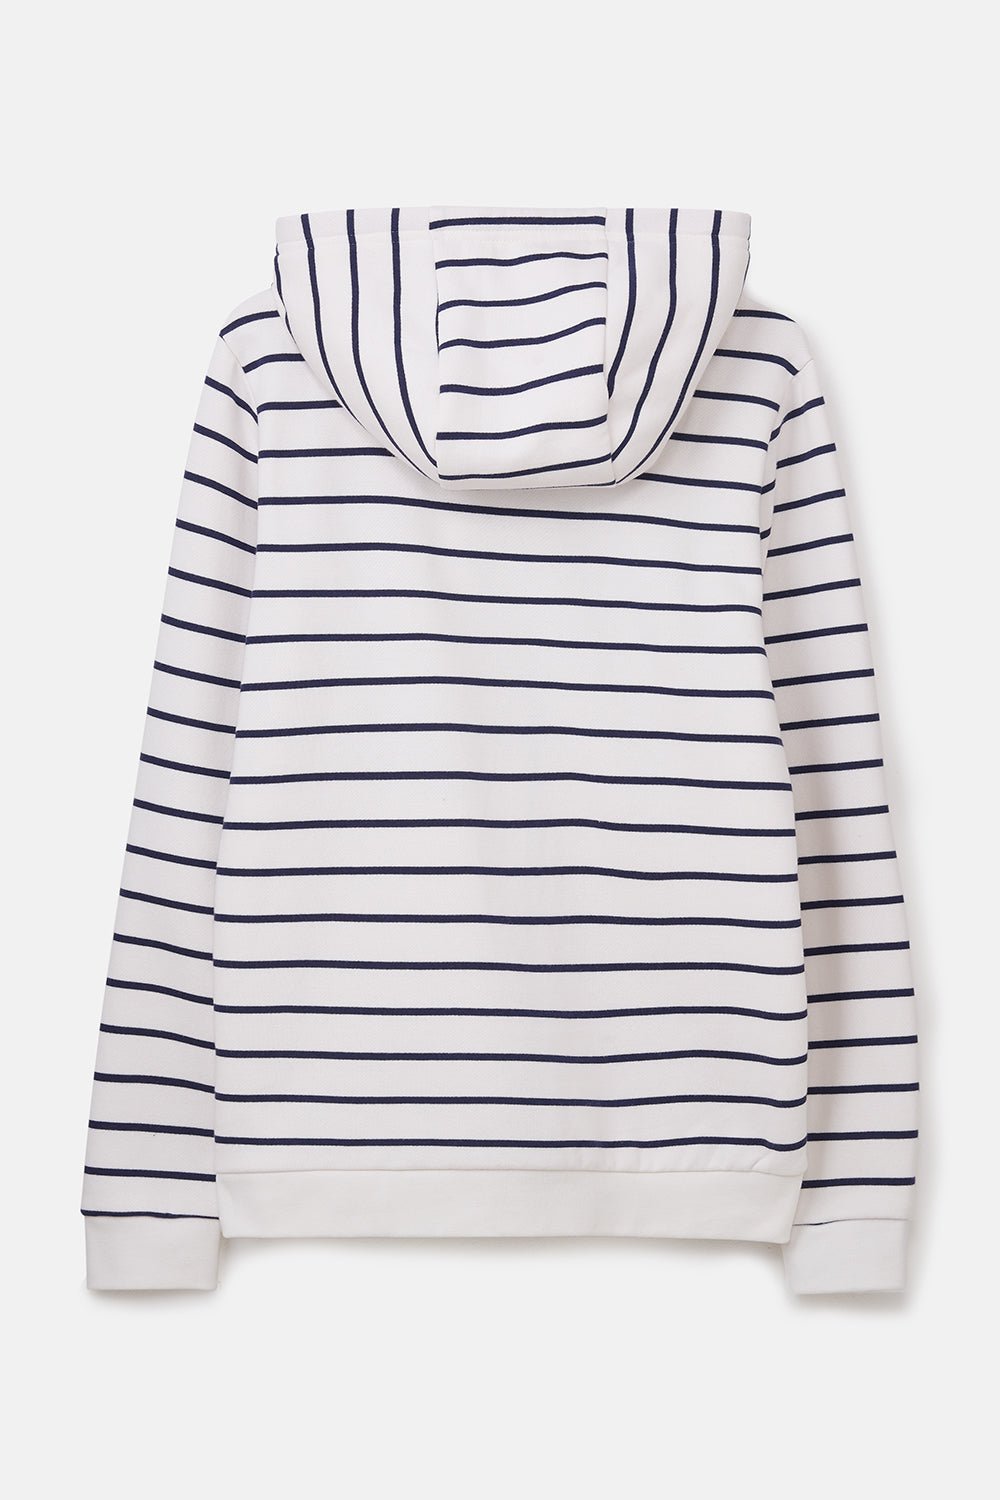 Strand Hooded Top - Navy Striped - Lighthouse